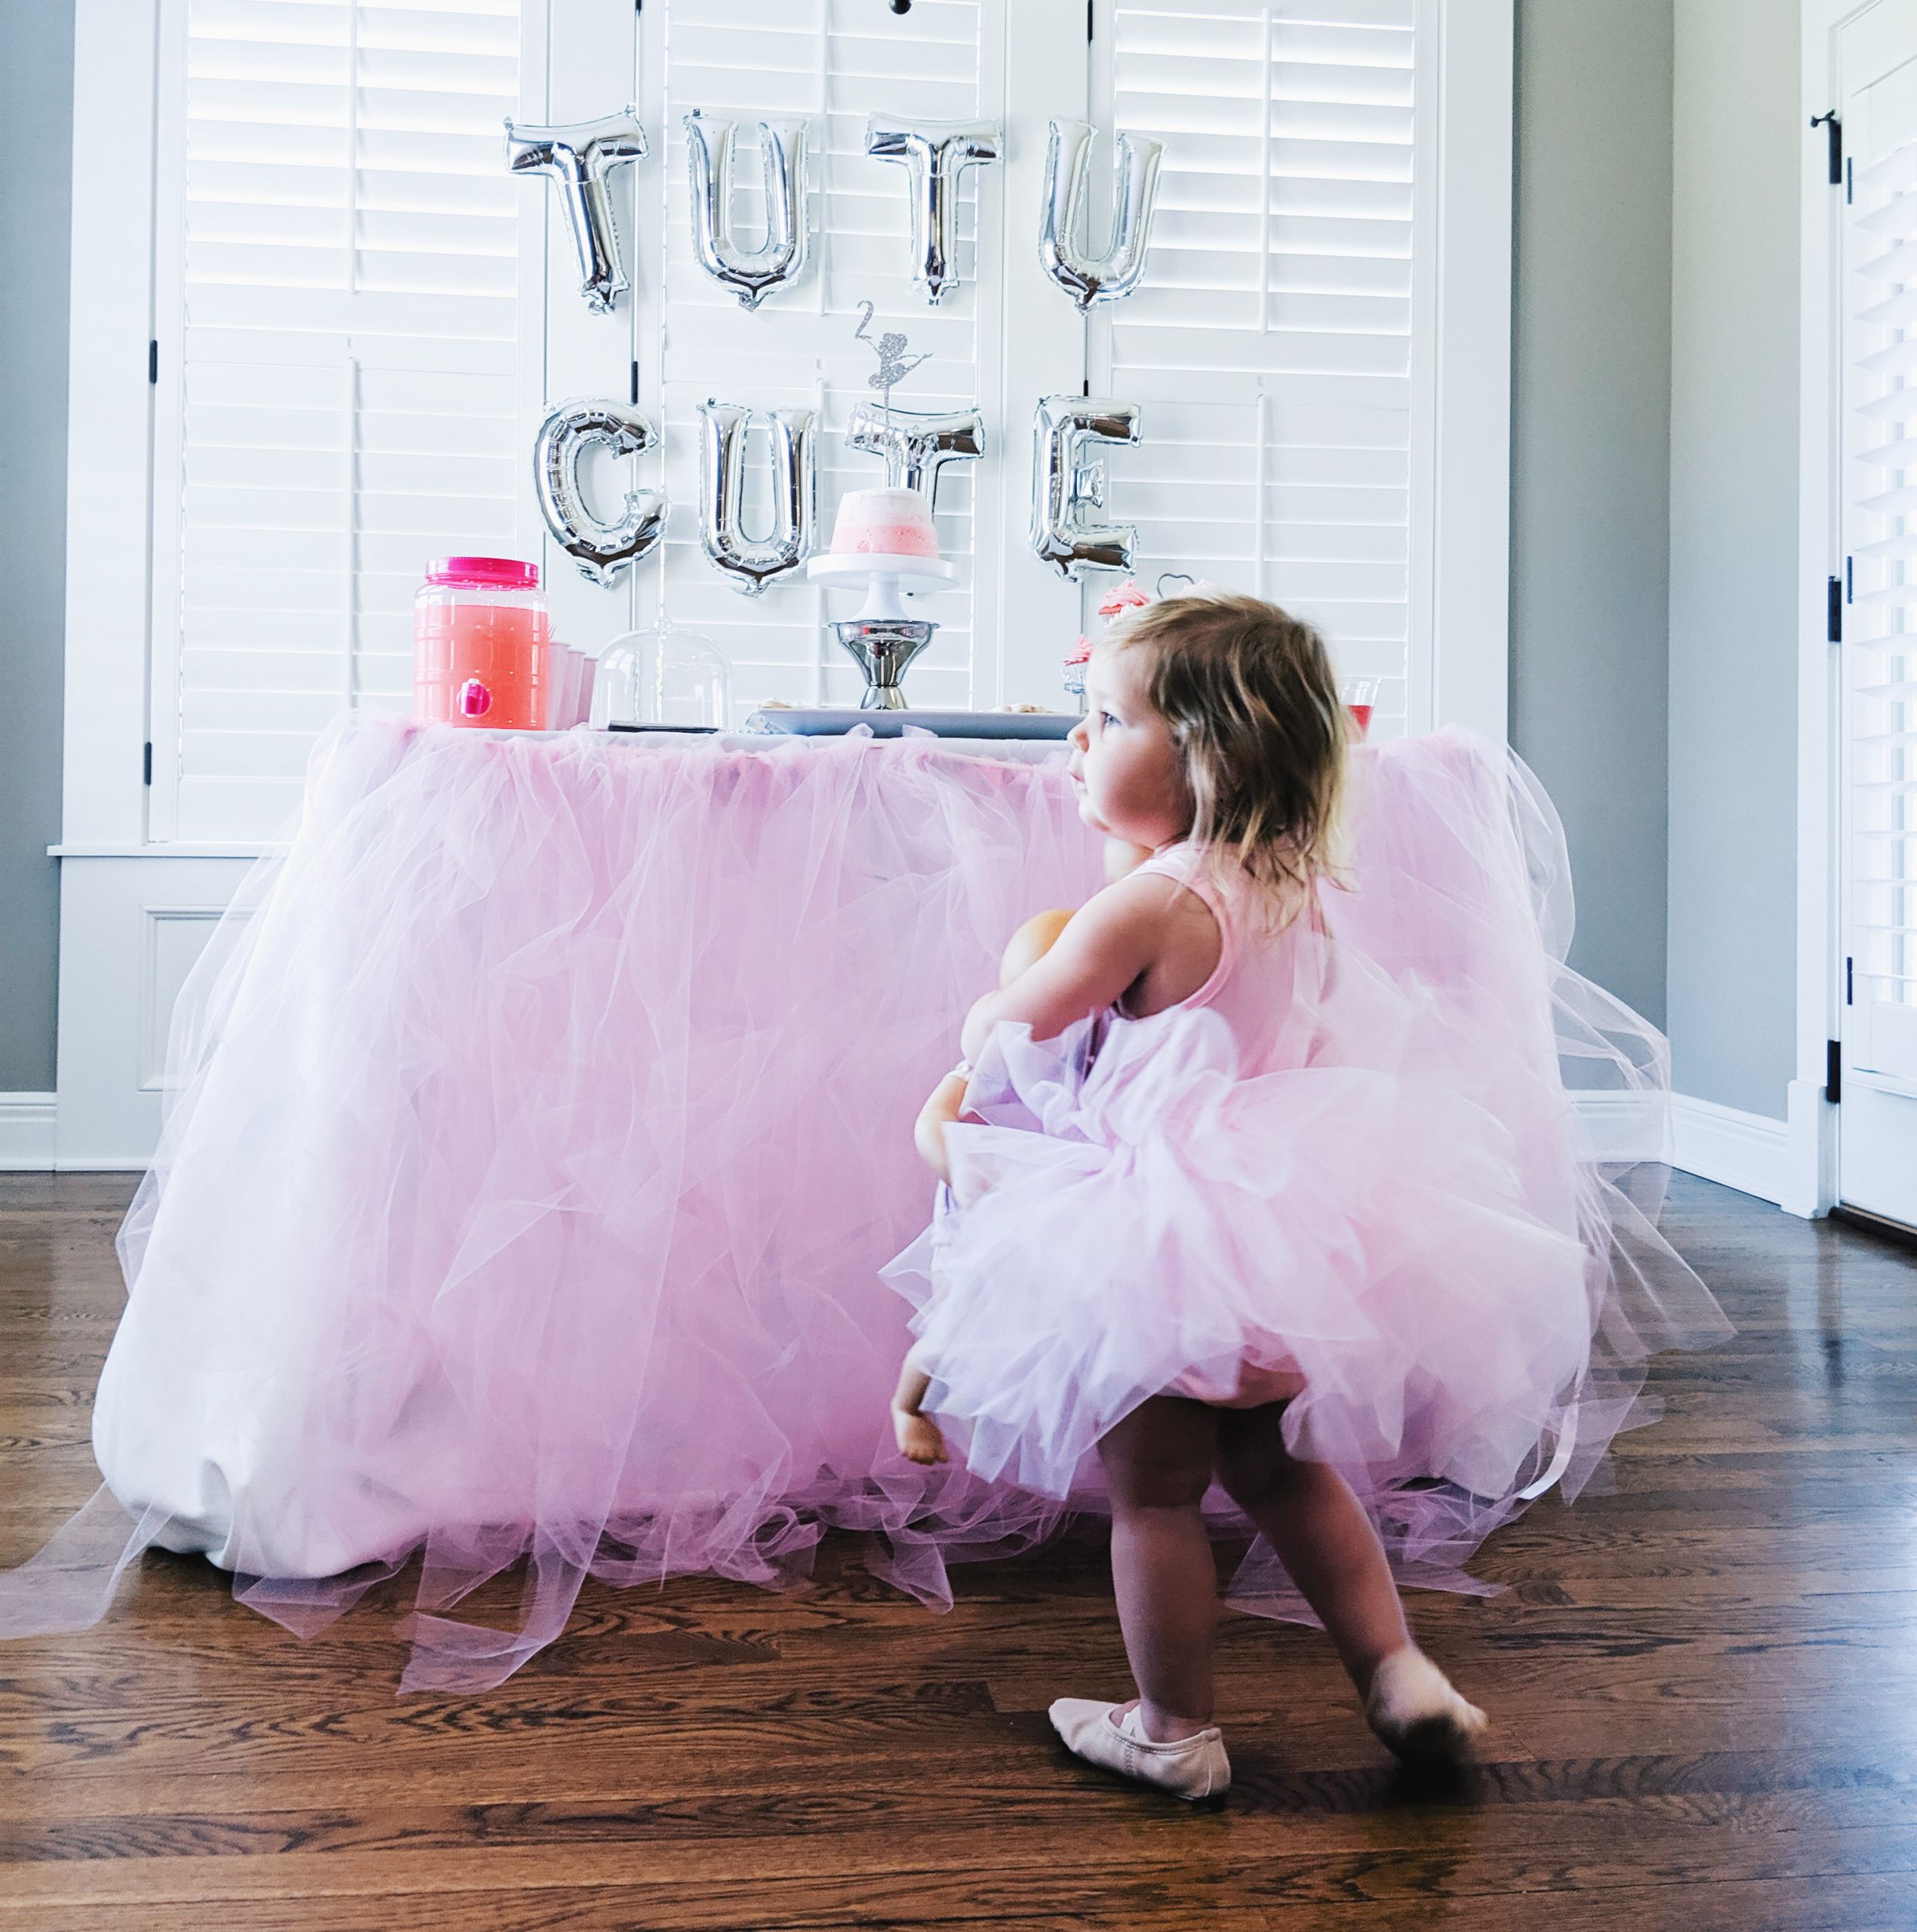 Two Years Old Birthday Party Ideas
 Tutu Cute Birthday Party 2nd Birthday Party Ideas